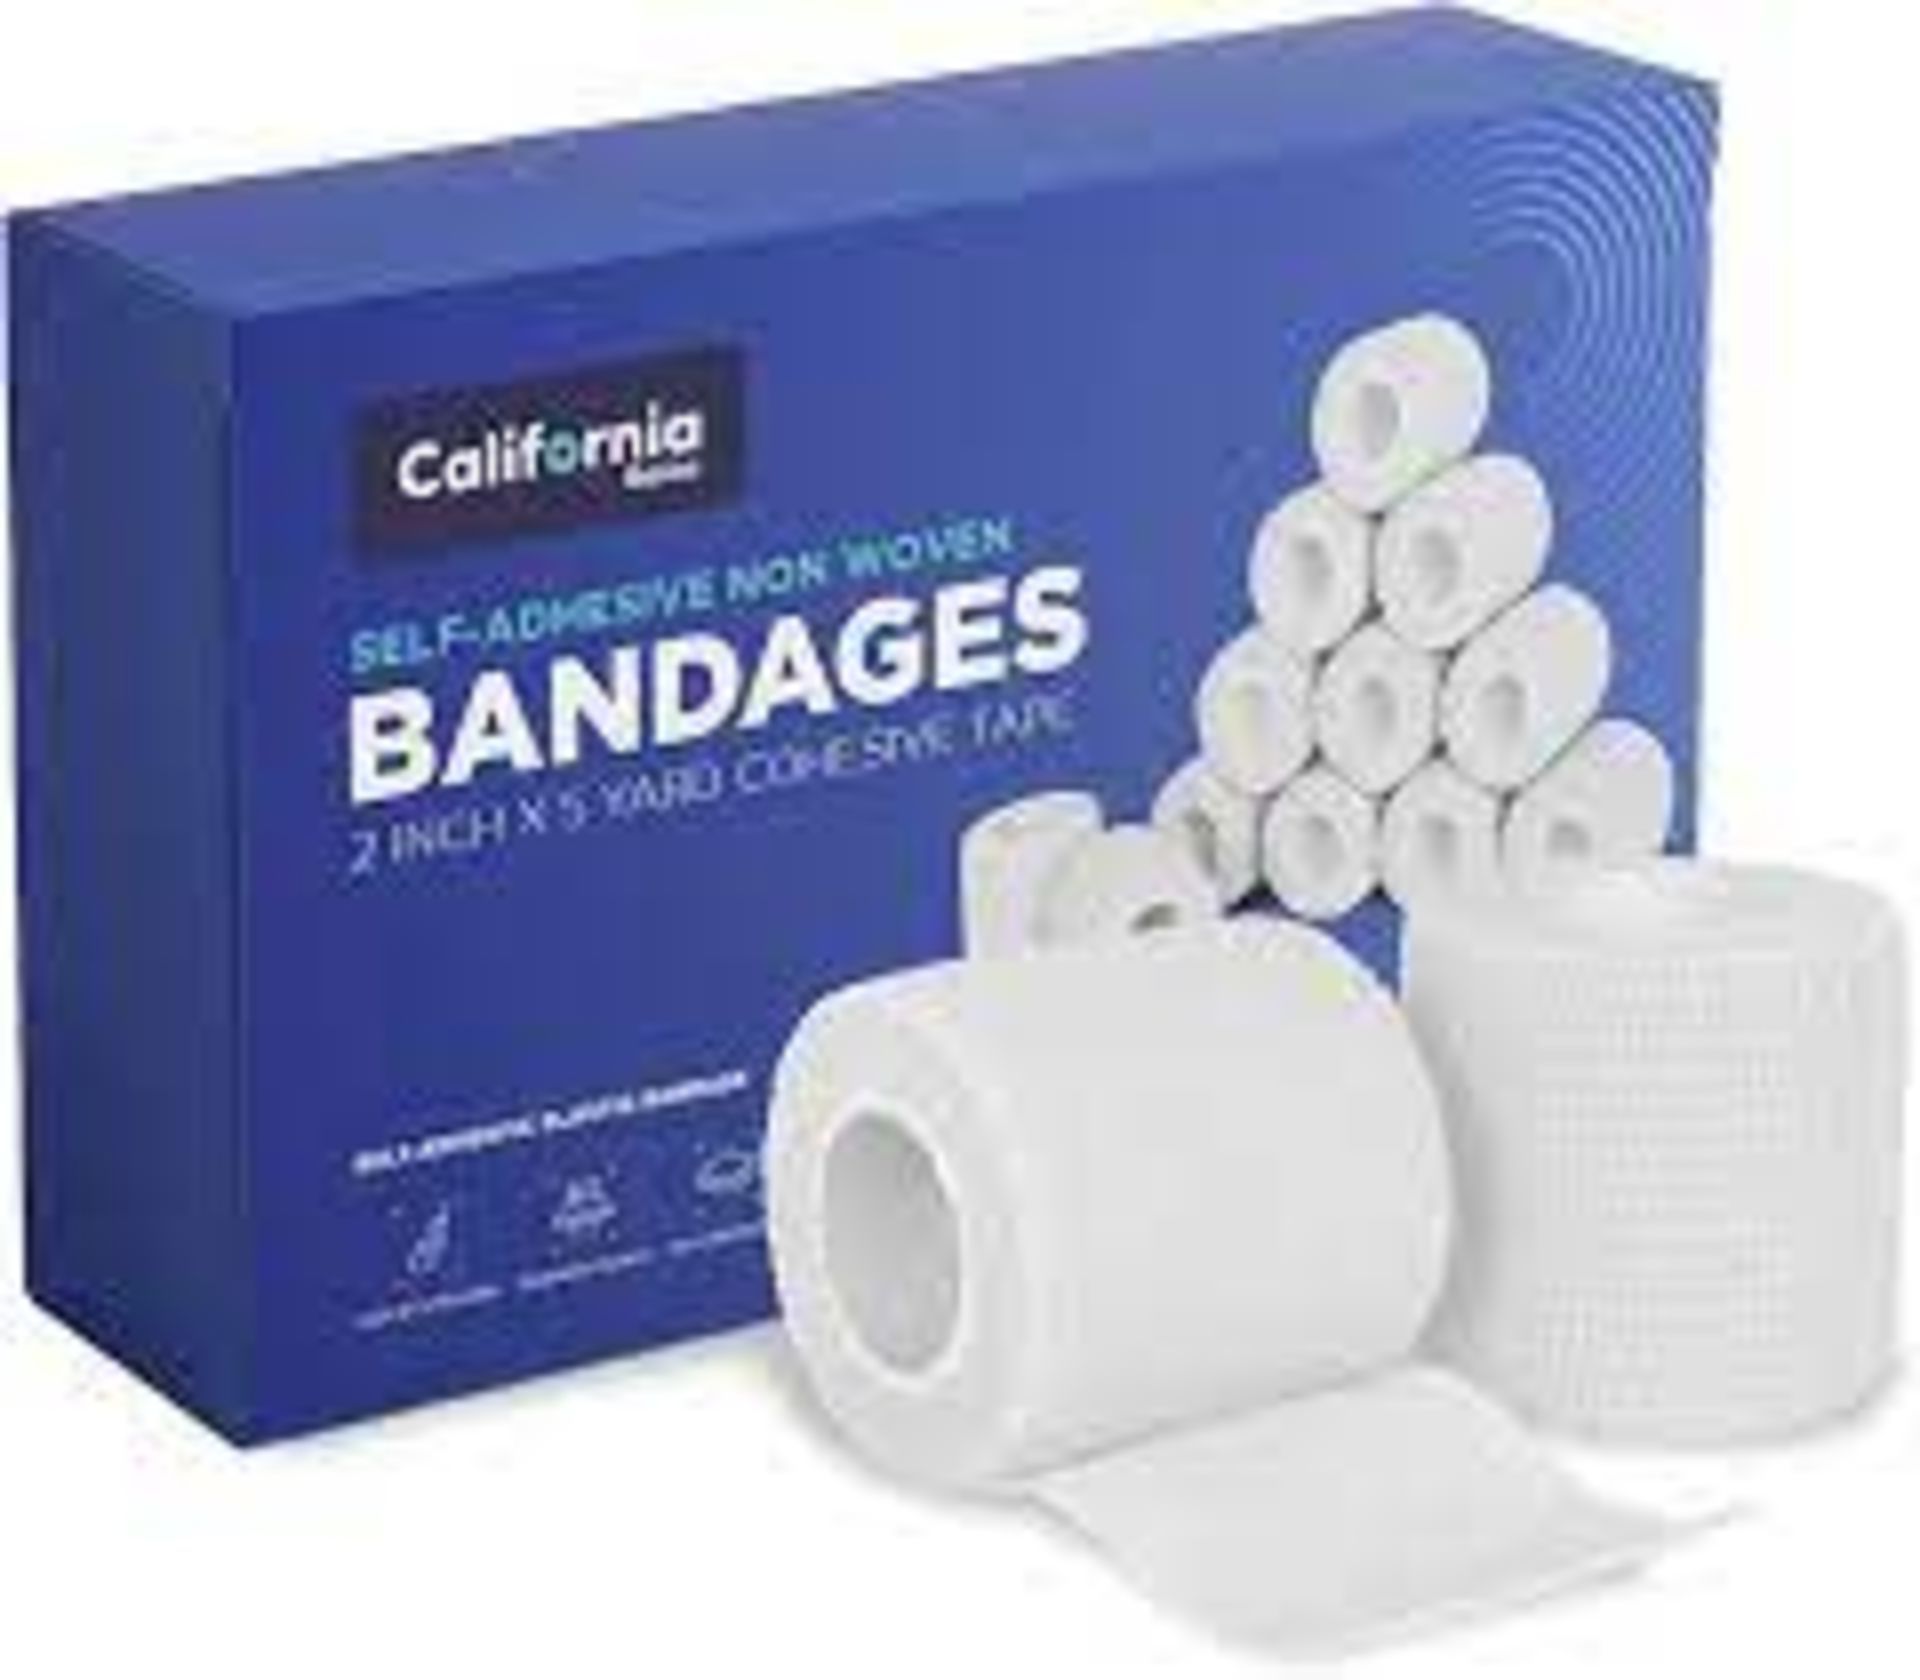 24 X BRAND NEW CALIFORNIA SETS OF 8 SELF ADHESIVE NON WOVEN BANDAGES 4 INCH X 5 YARD COHESIVE TAPE